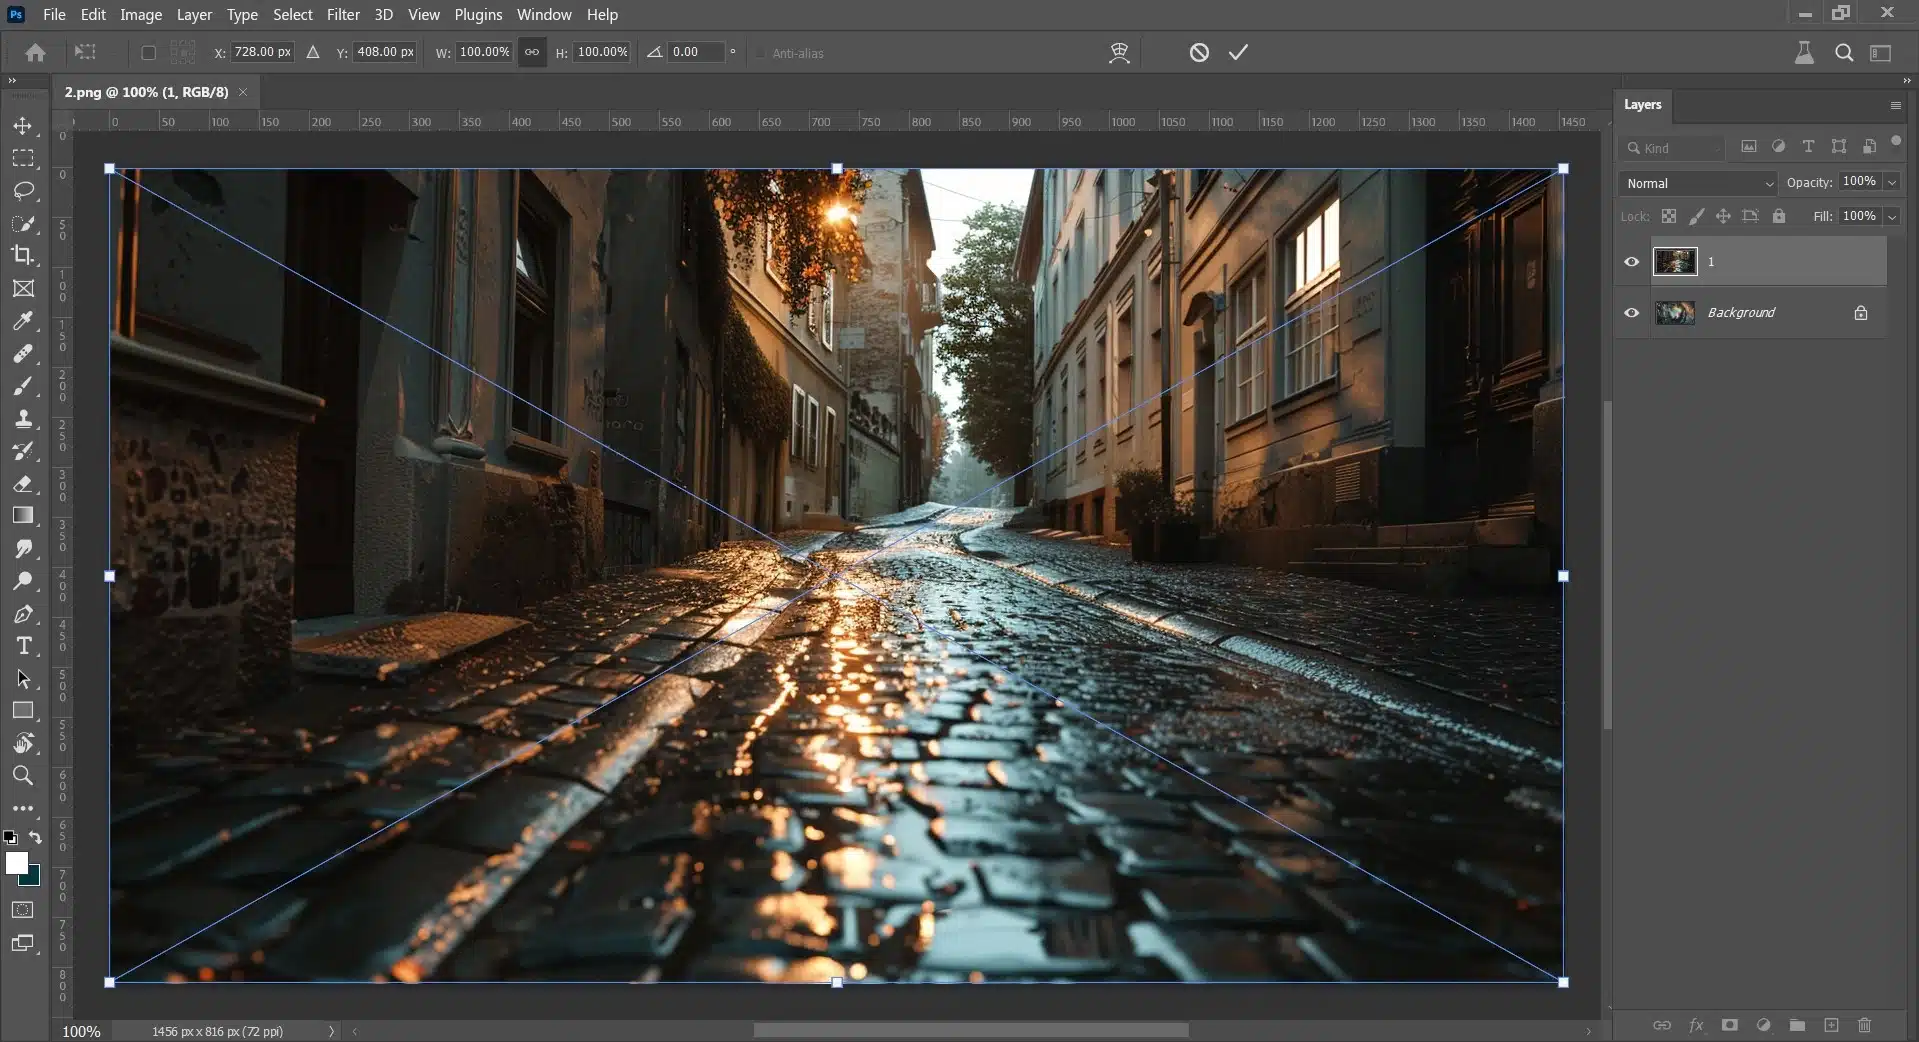 A screenshot of photo editing software showing a rainy cobblestone street being edited, with the 'Free Transform' tool actively used to adjust perspective.